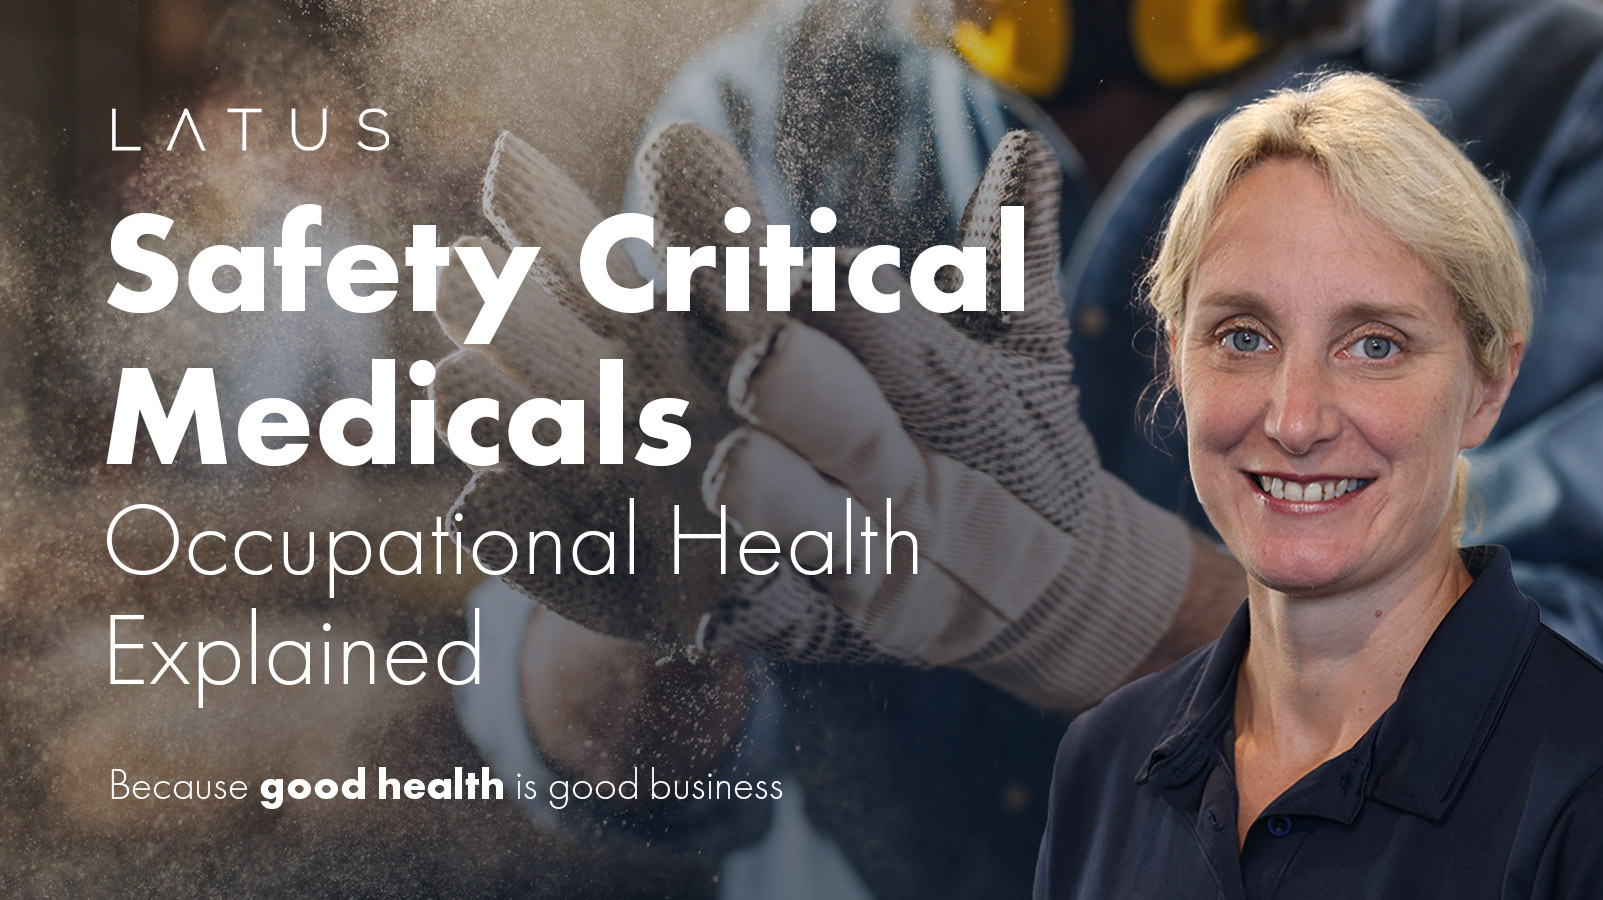 What are Safety Critical and Fit For Work Medicals?